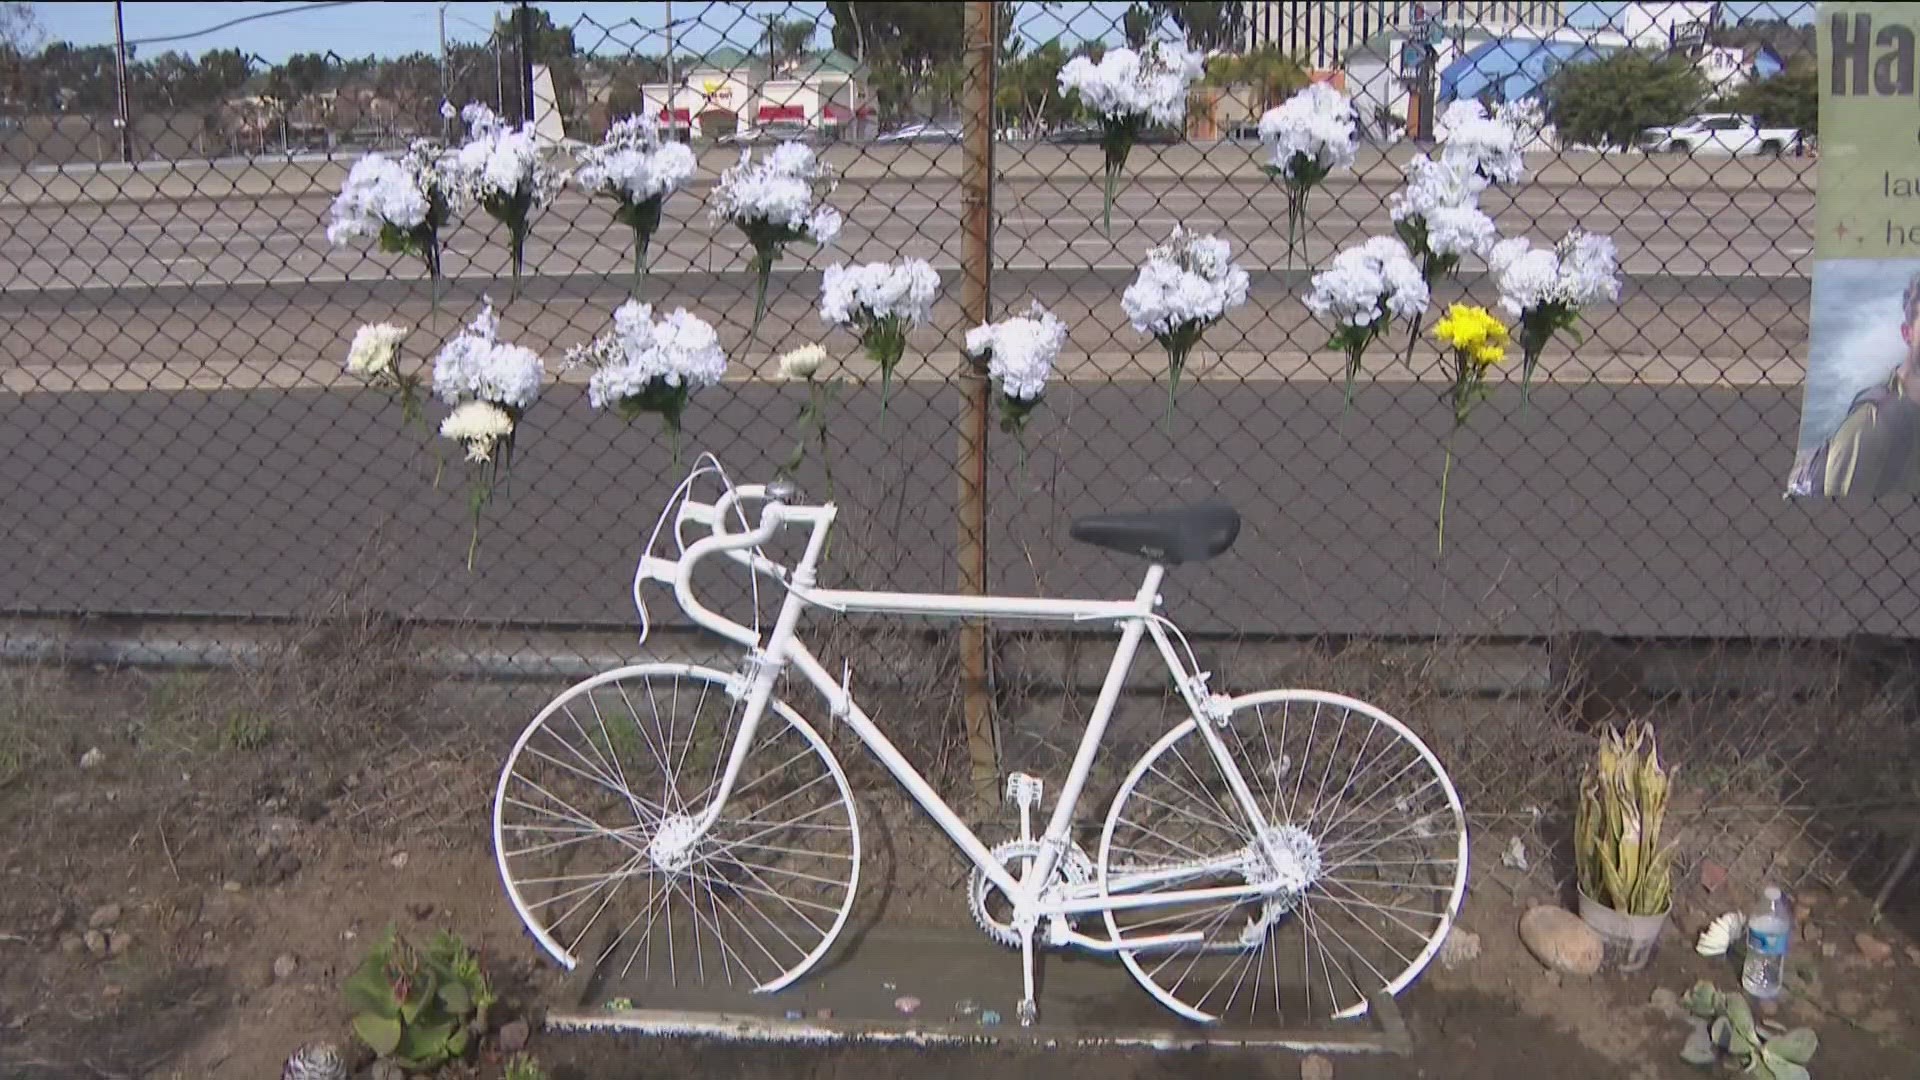 A little over three weeks ago, a memorial was burned down and now a new one is being set up for a special man in the biking community.